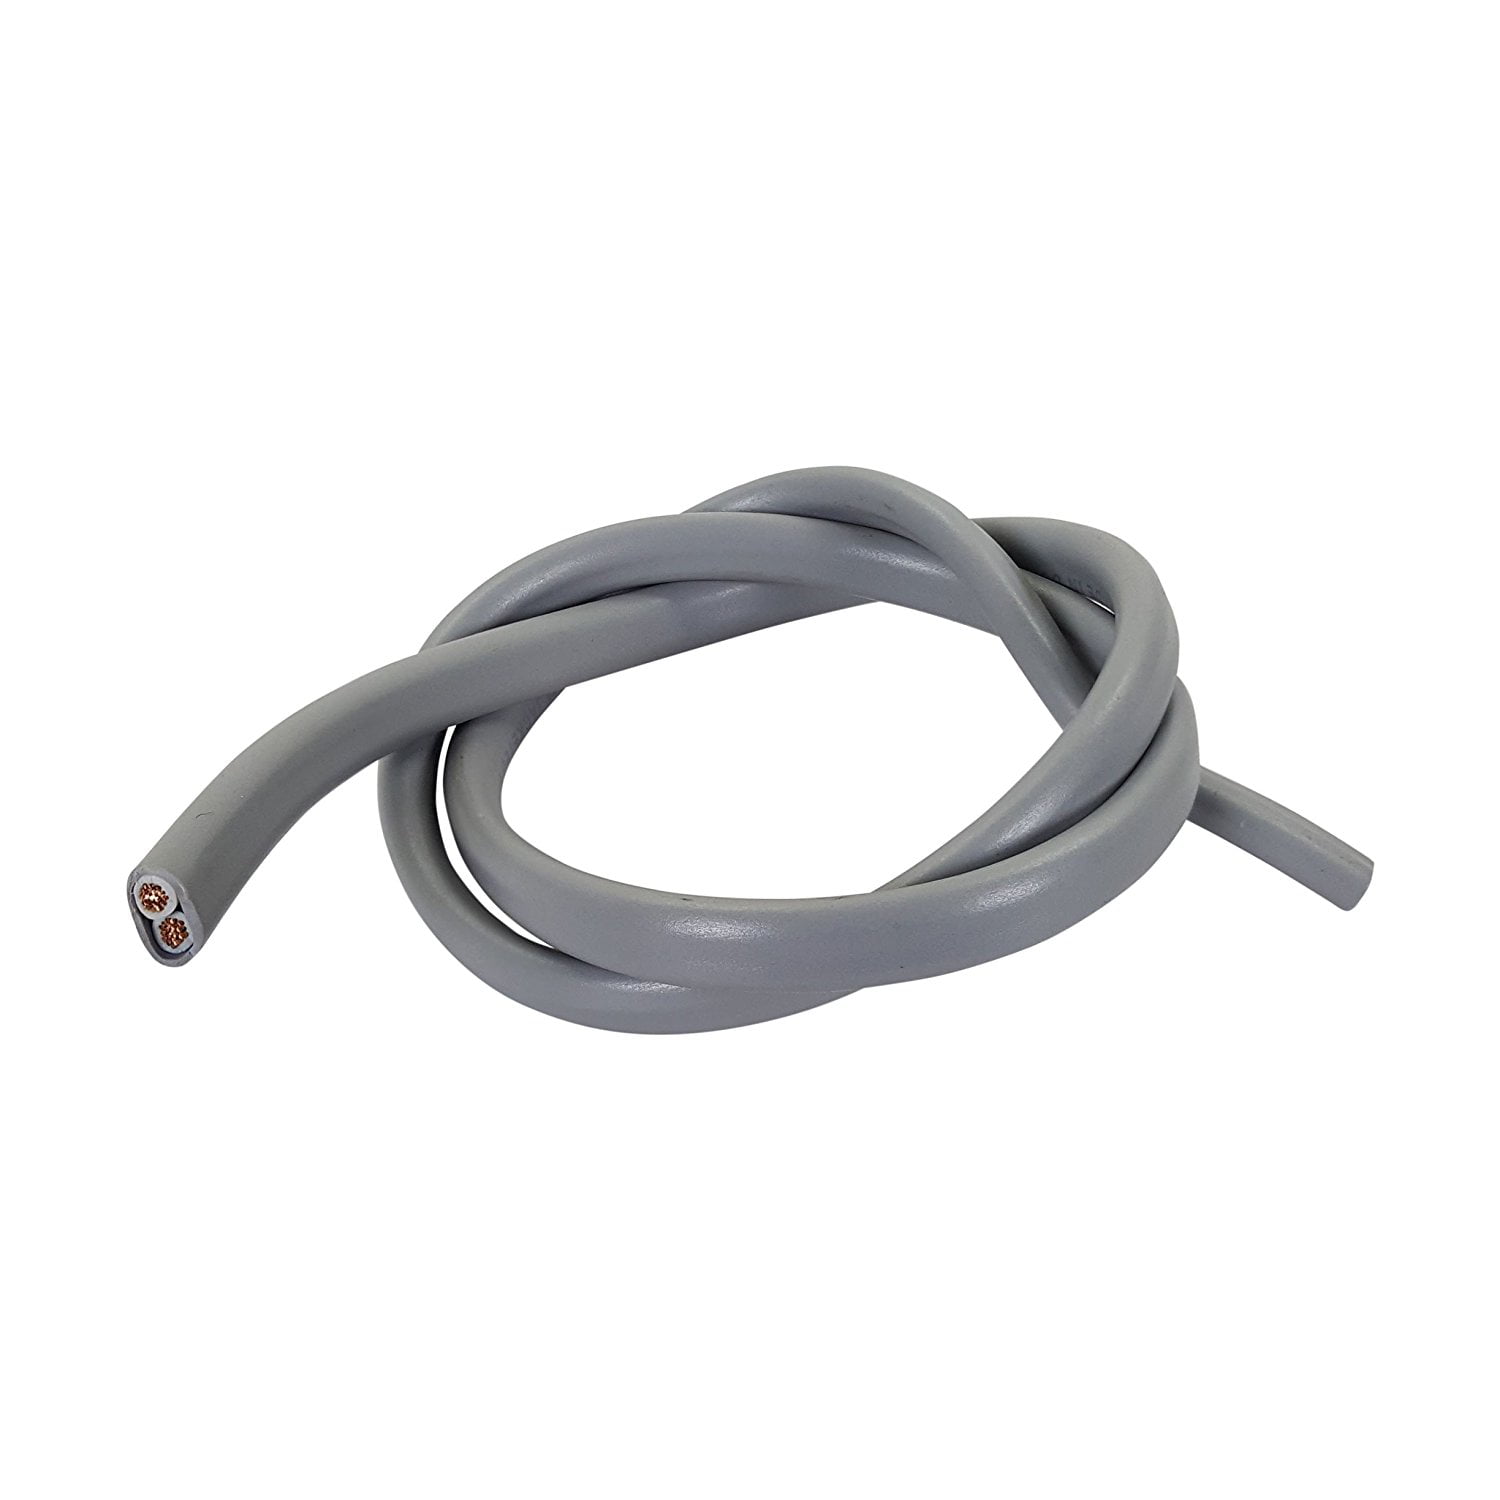 Trailer Light Brake Cable Wiring Harness 12 2 12 Gauge 2 Wire Jacketed Grey By Recpro Ship From Us Walmart Com Walmart Com